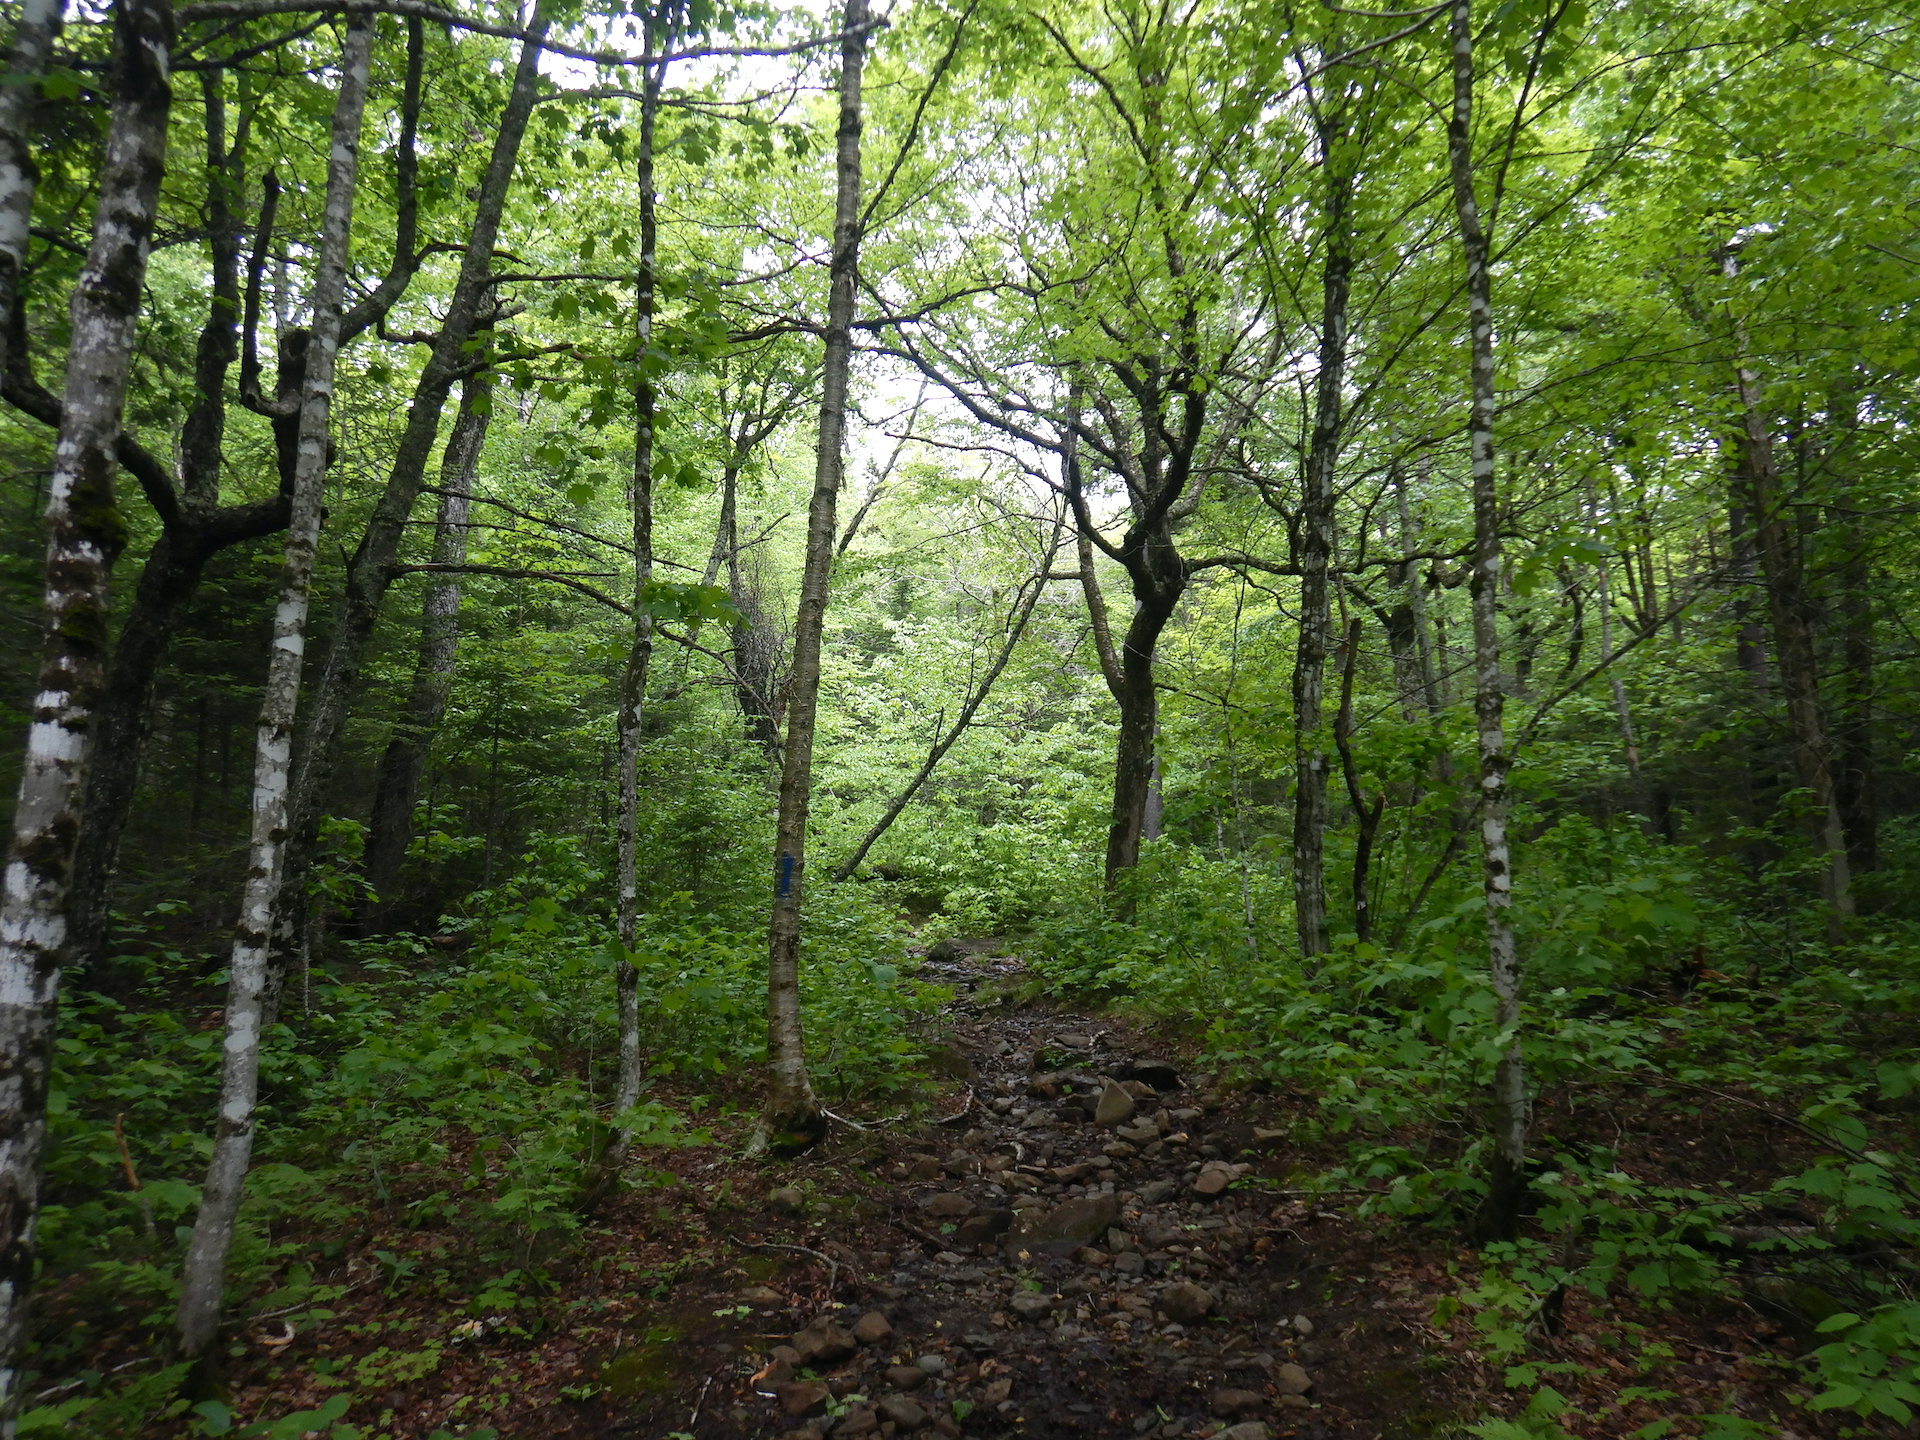 A rocky trail disappears into a green forest. Trees with bright green leaves obscure the sky. The understory is also thick with green plants.